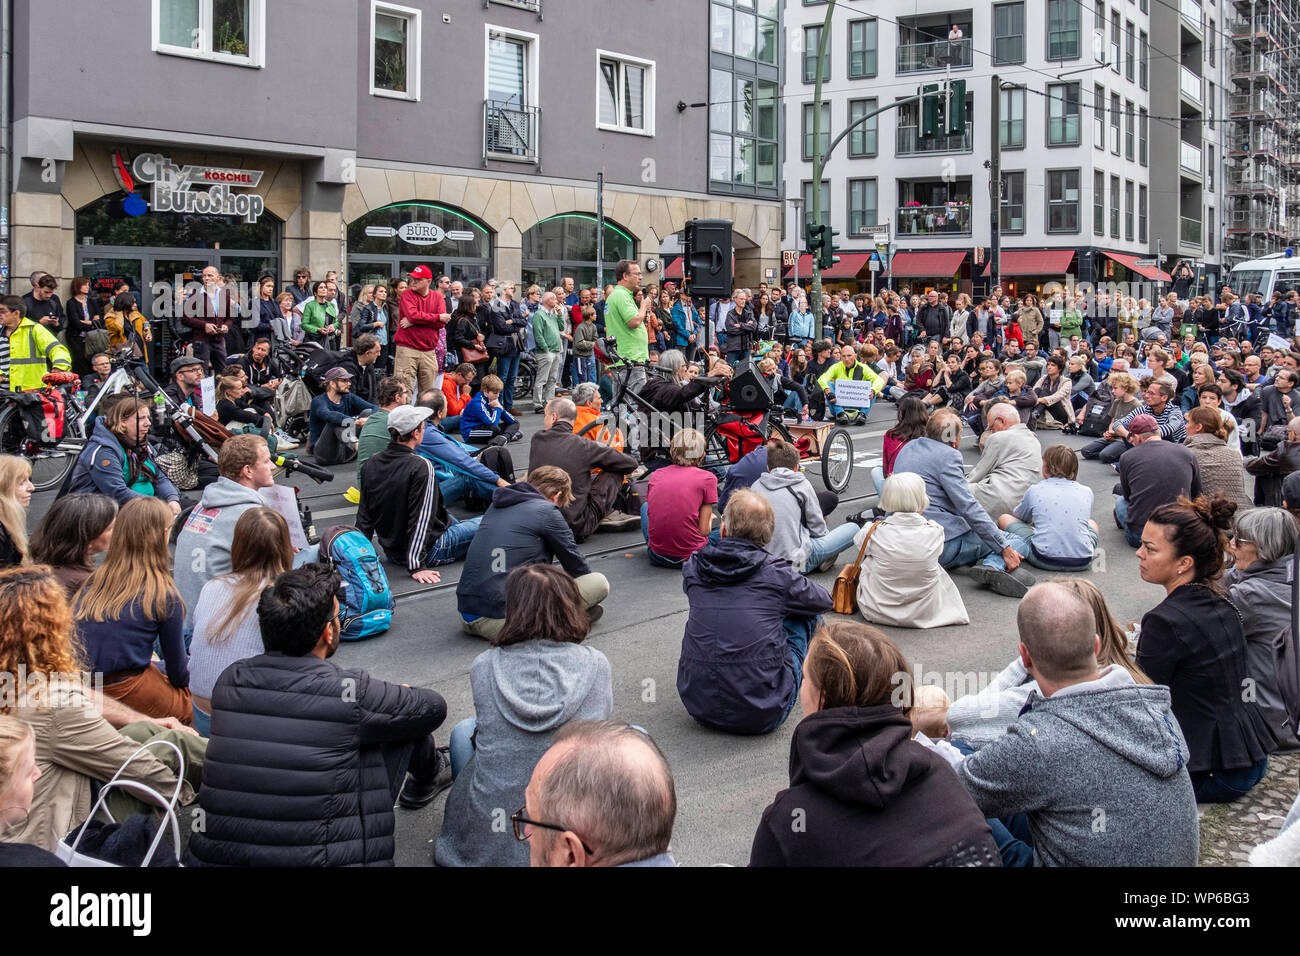 Germany, Berlin, Cnr. Invalidenstrasse & Ackerstrasse. 7th September 2019.Vigil for four people killed in accident as a Porche SUV ploughed onto sidewalk of Friday evening. Berliners gathered to mourn the dead and bring flowers & candles to the site of the accident. There was also a call for SUV vehicles to be restricted in the city and for a new speed limit. credit: Eden Breitz/Alamy Stock Photo